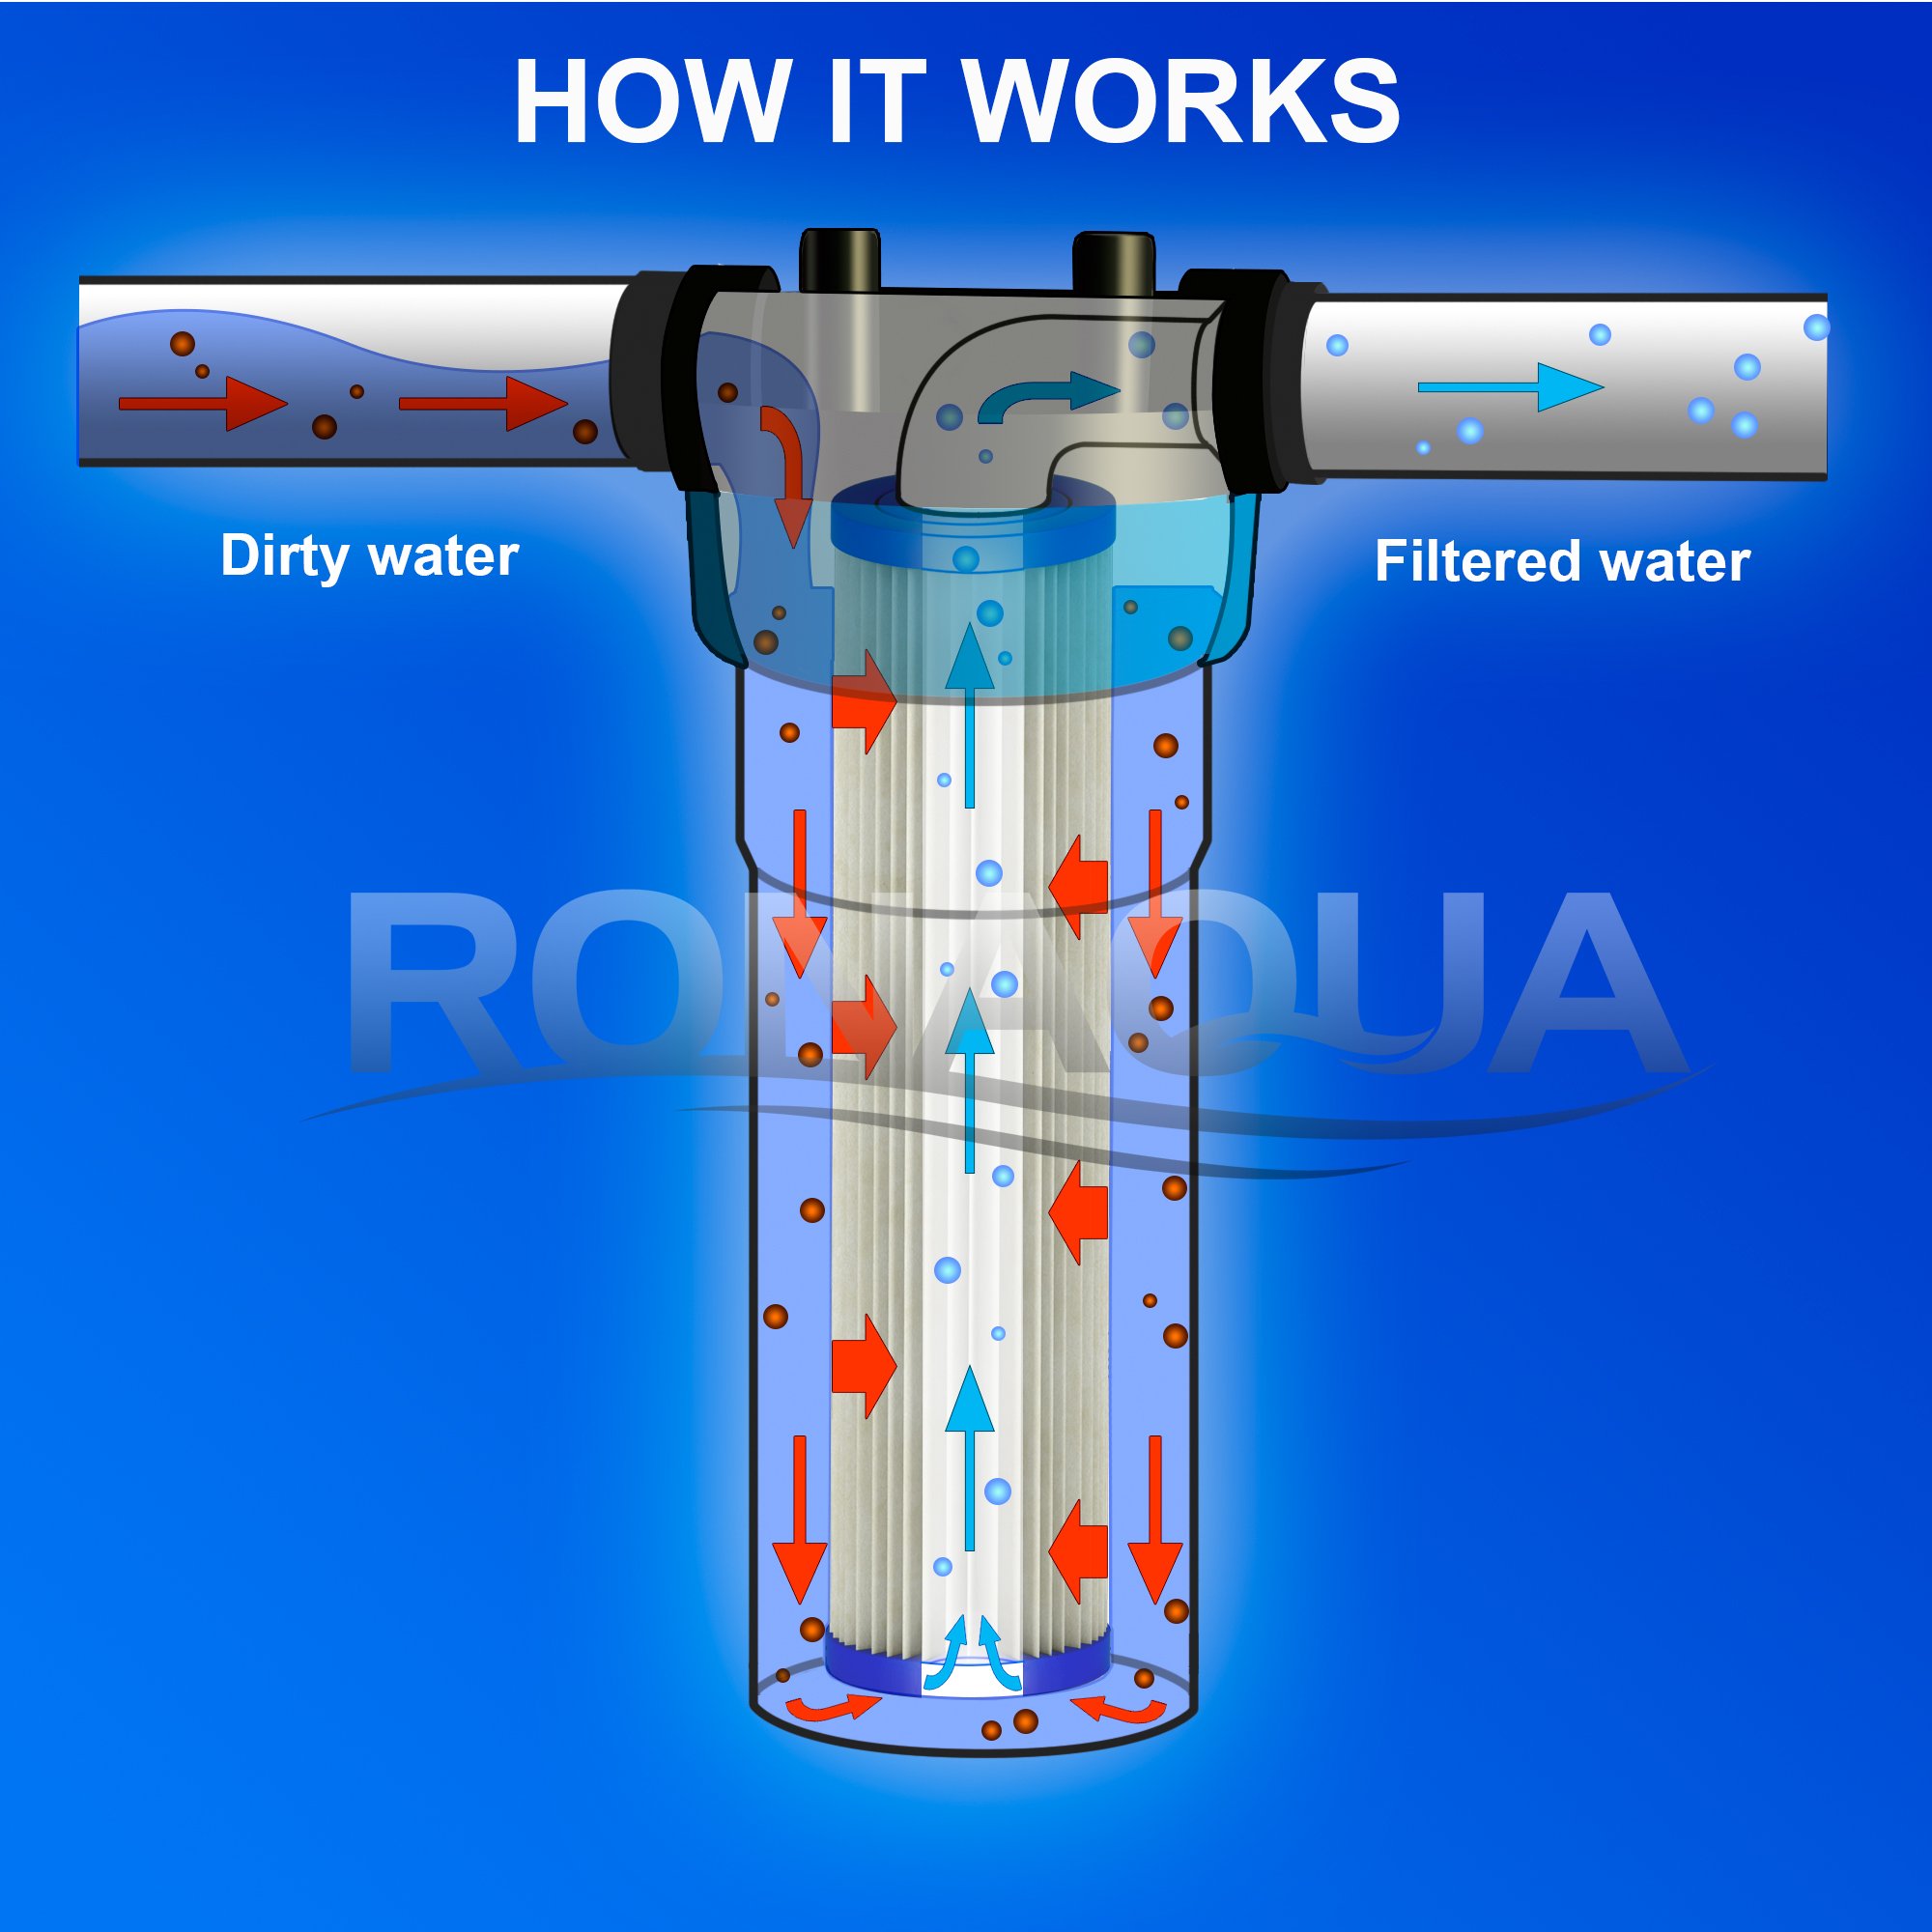 Ronaqua 6 Pleated Sediment Water Filter Cartridge 9.87”x 2.5” Amplified Surface Area, Removes Sand, Dirt, Rust, Extended Filter Life WELL-MATCHED with WHKF-WHPL, 801-50, WB-50W, WFPFC3002, SPC-25-1050